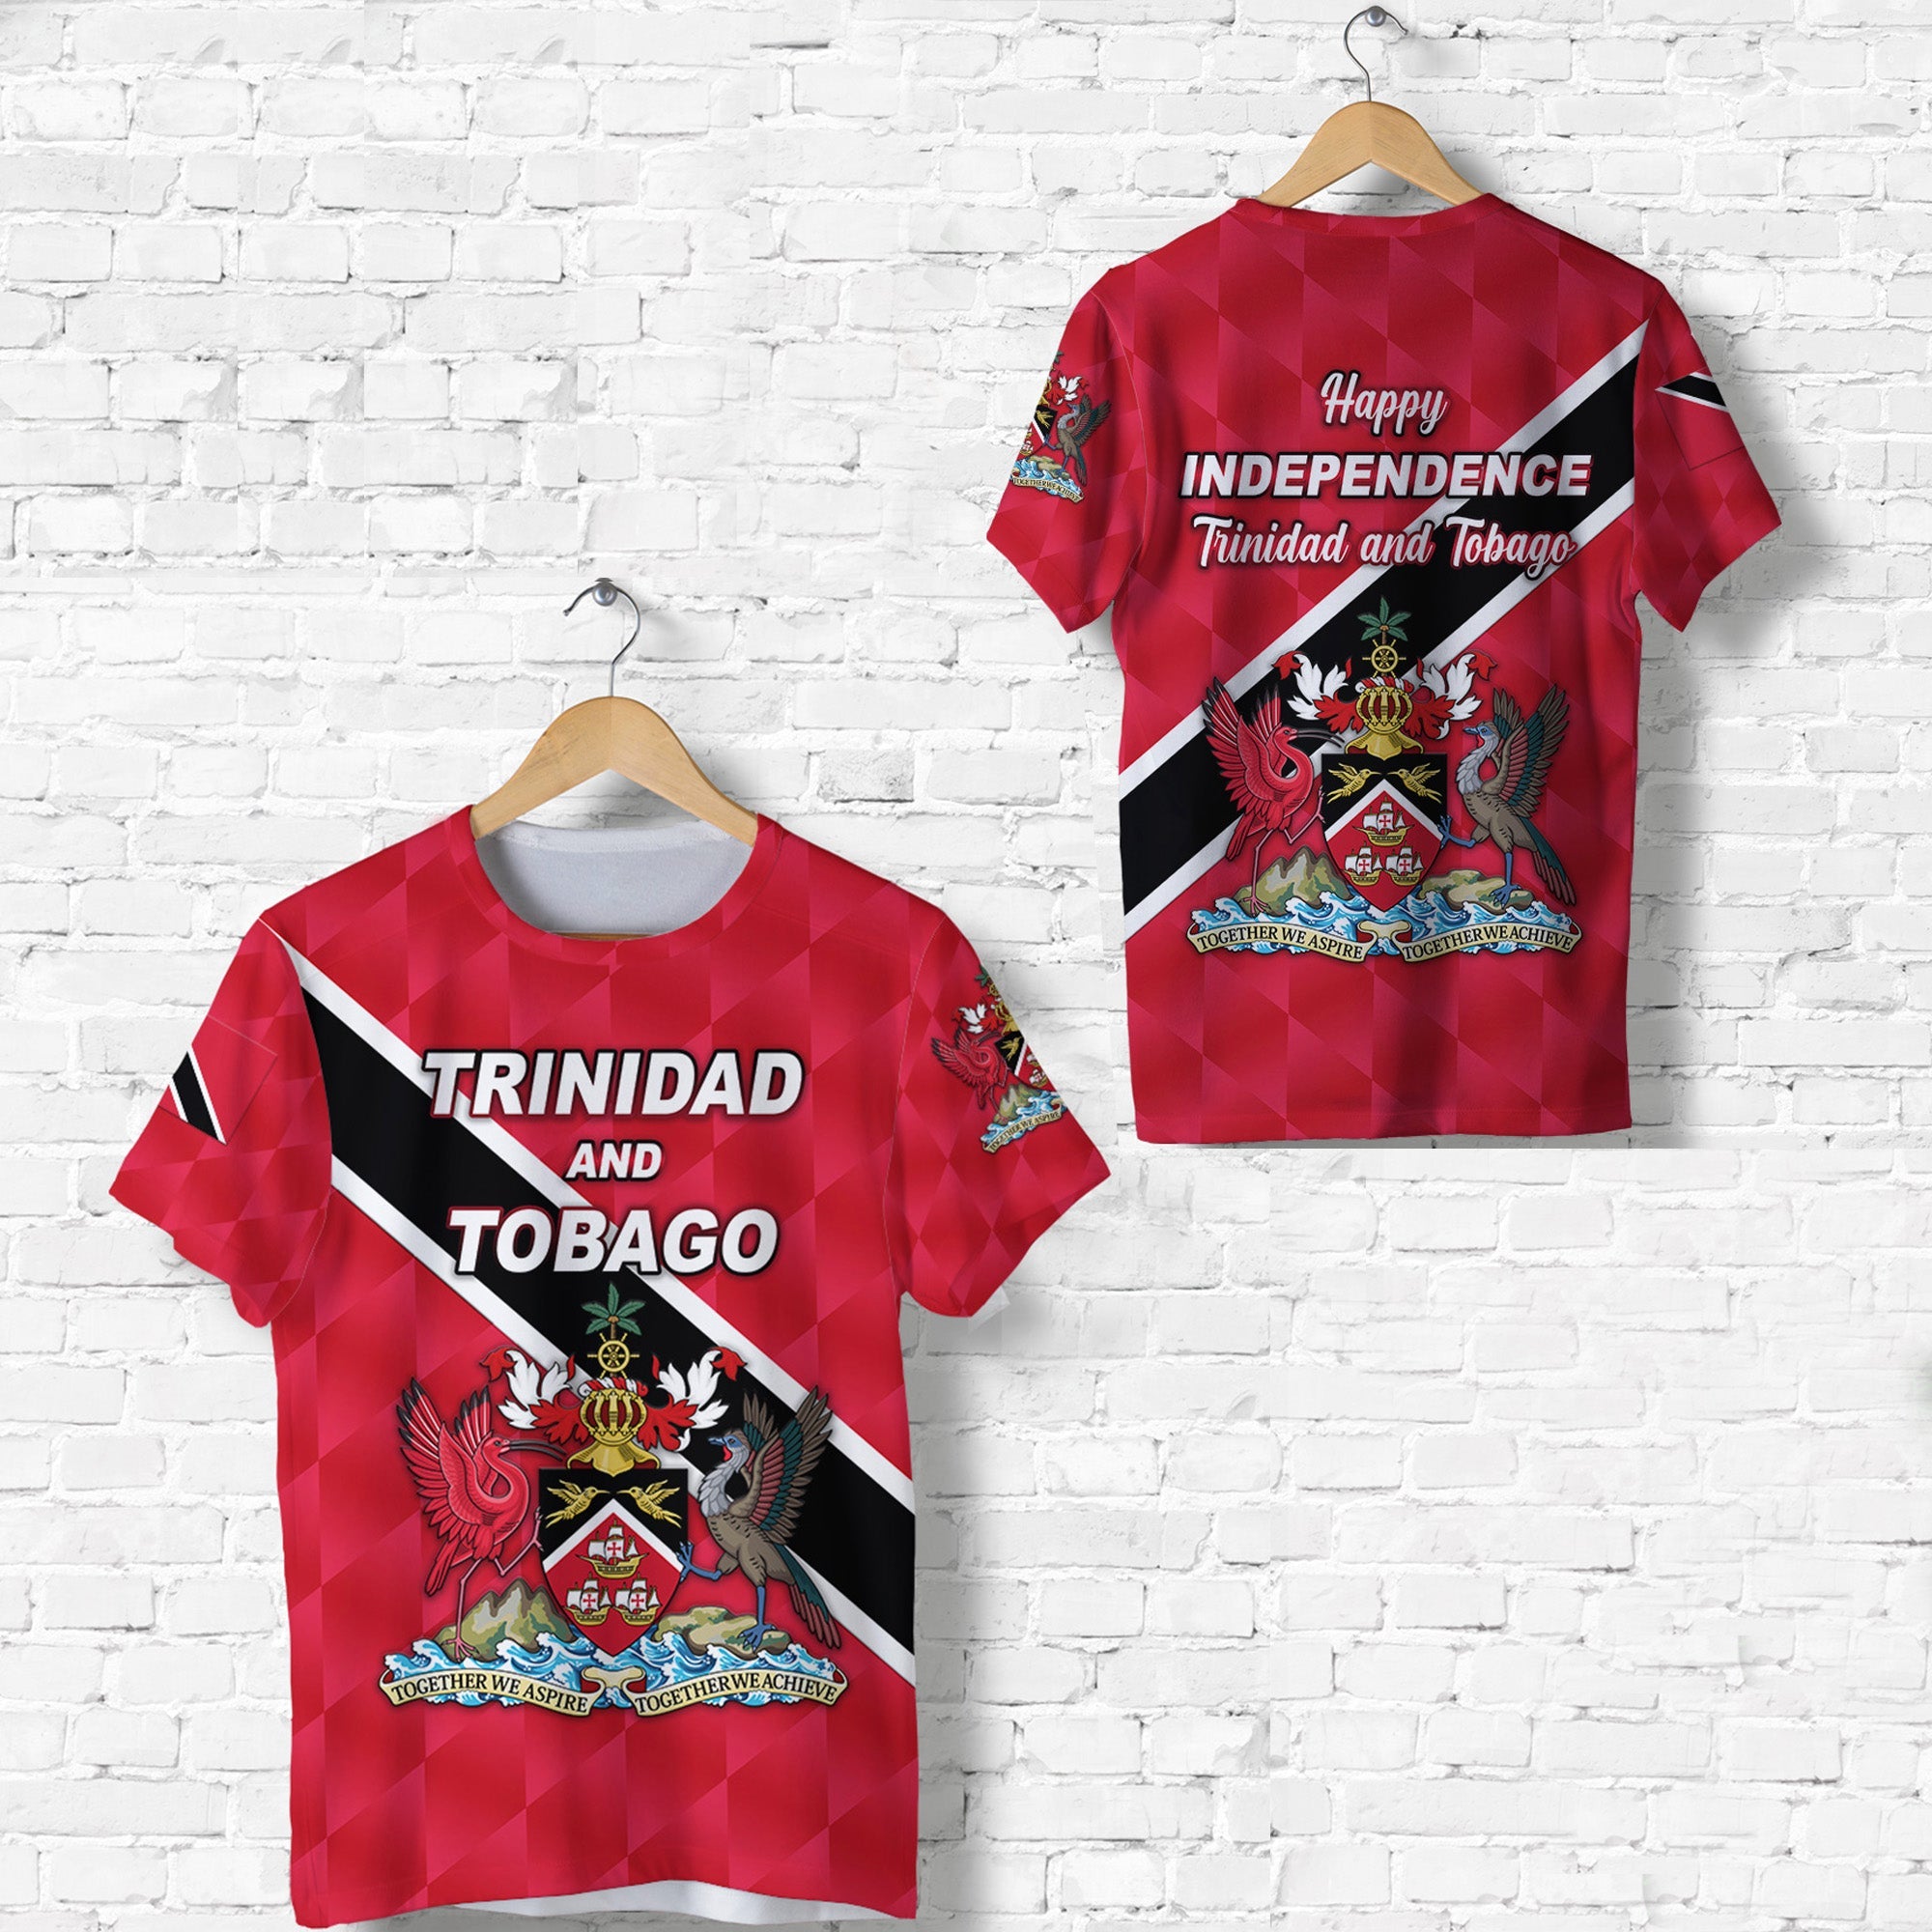 happy-trinidad-and-tobago-t-shirt-independence-day-red